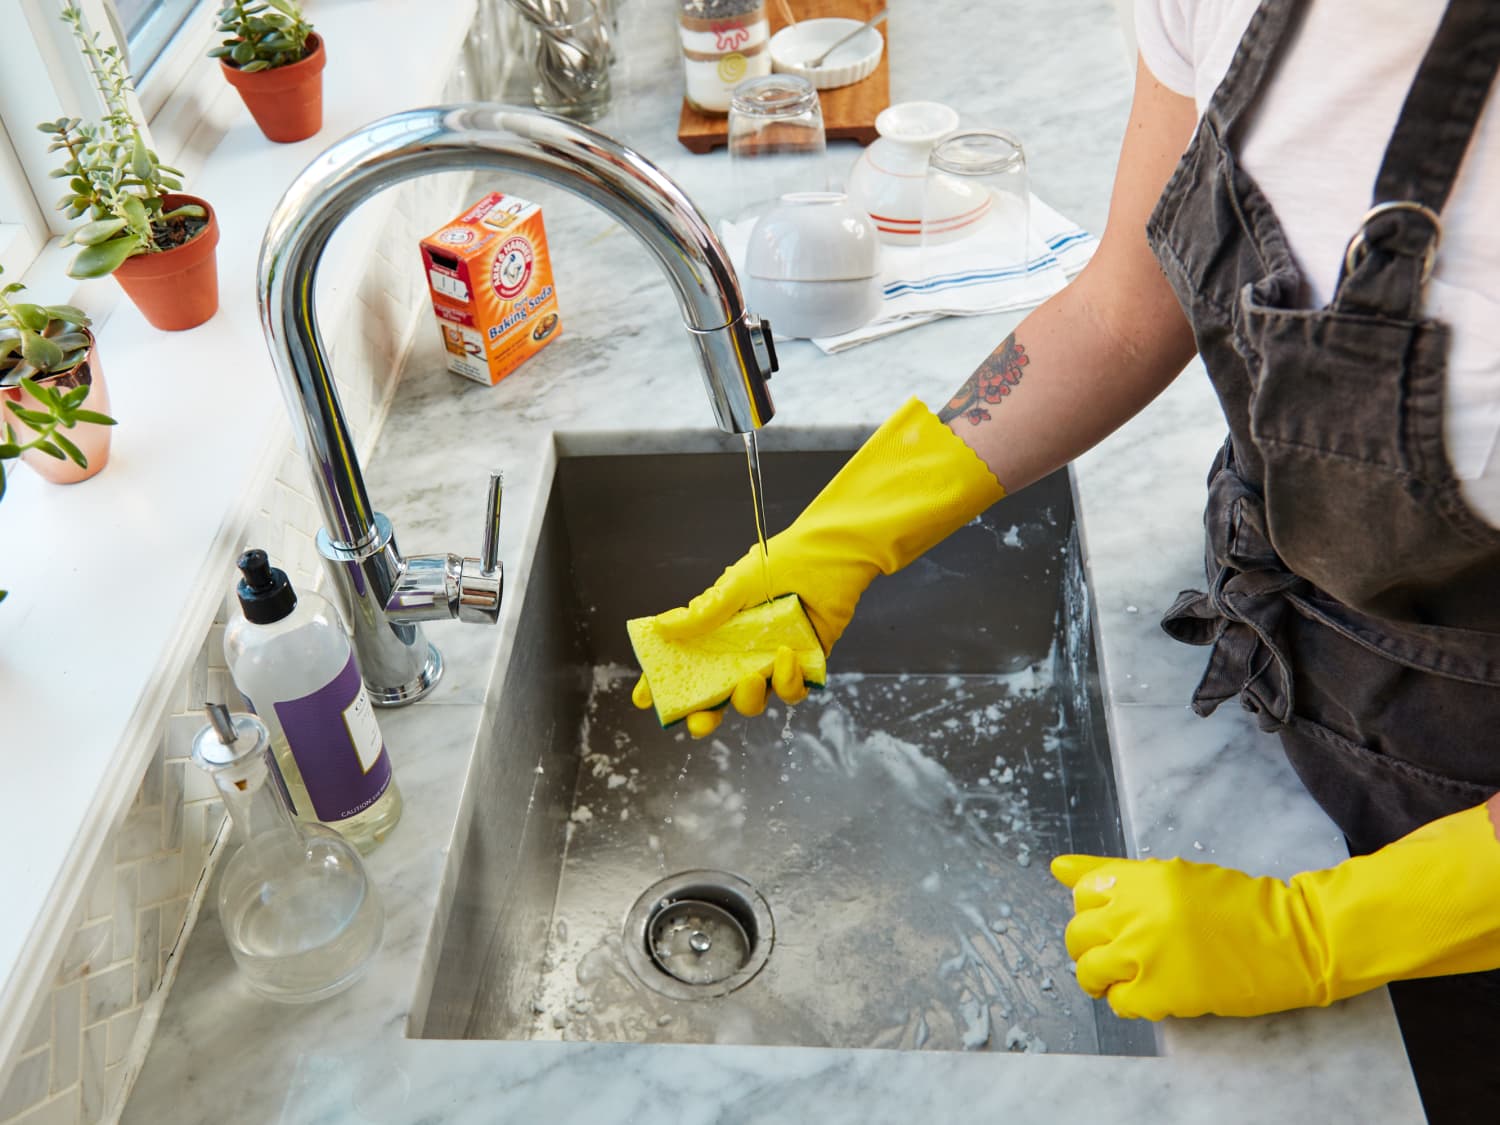 10 dependable kitchen cleaning supplies under $10